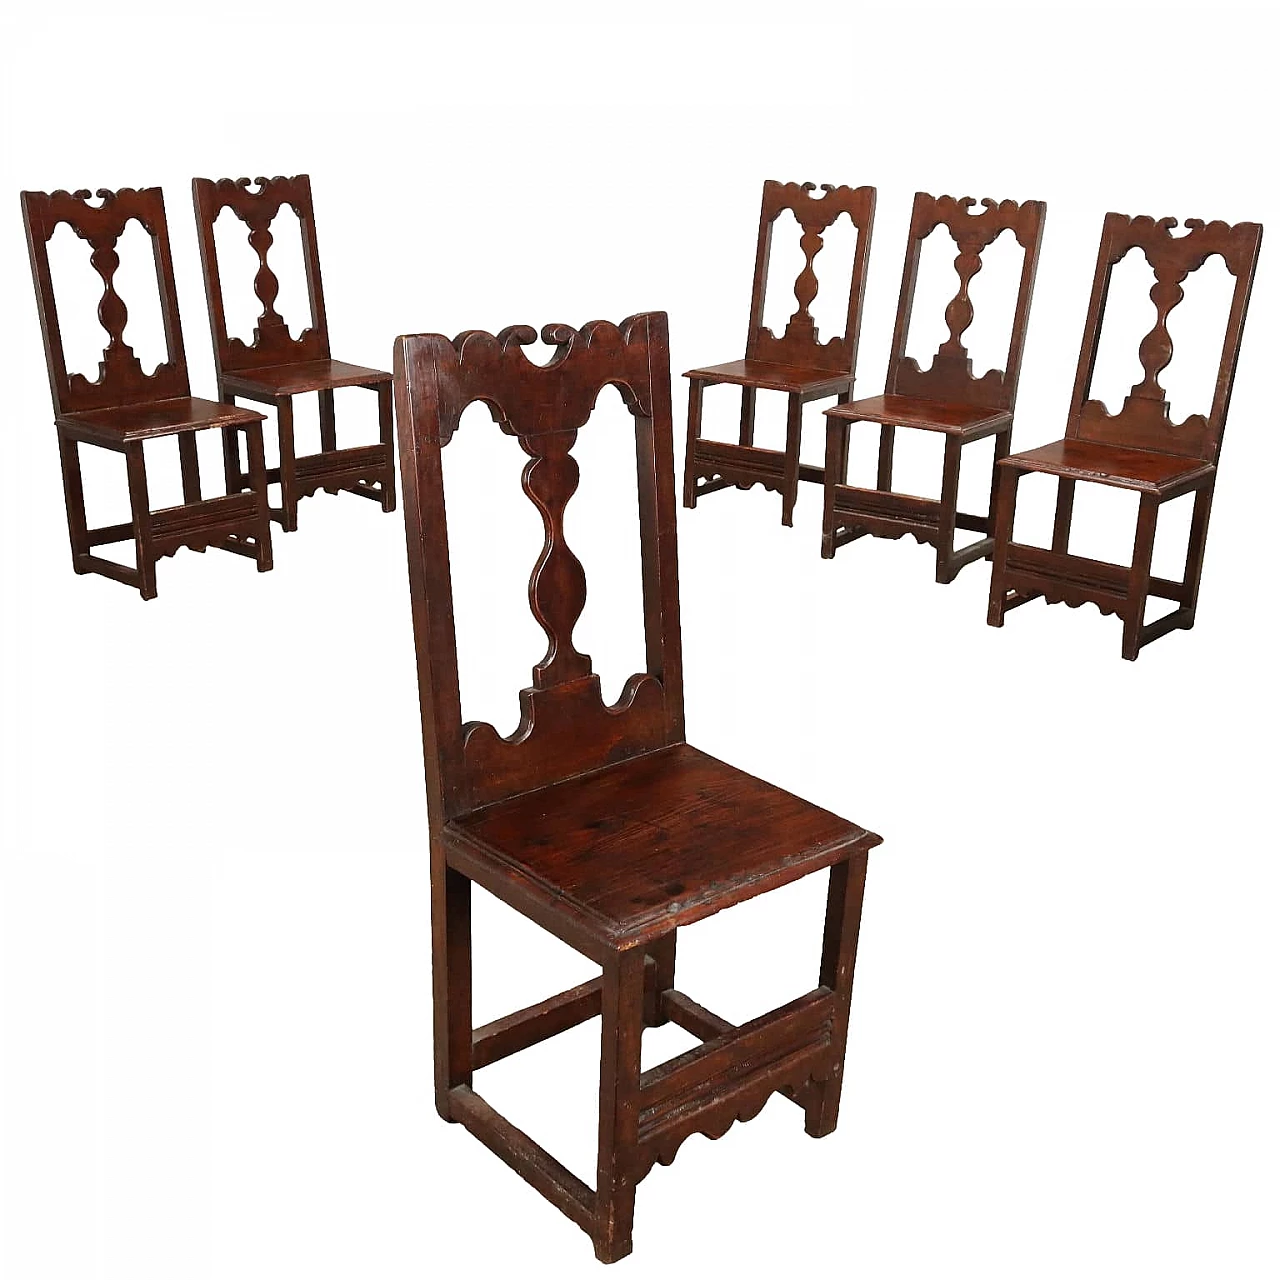 6 Neo-Renaissance beech and chestnut chairs, late 19th century 1